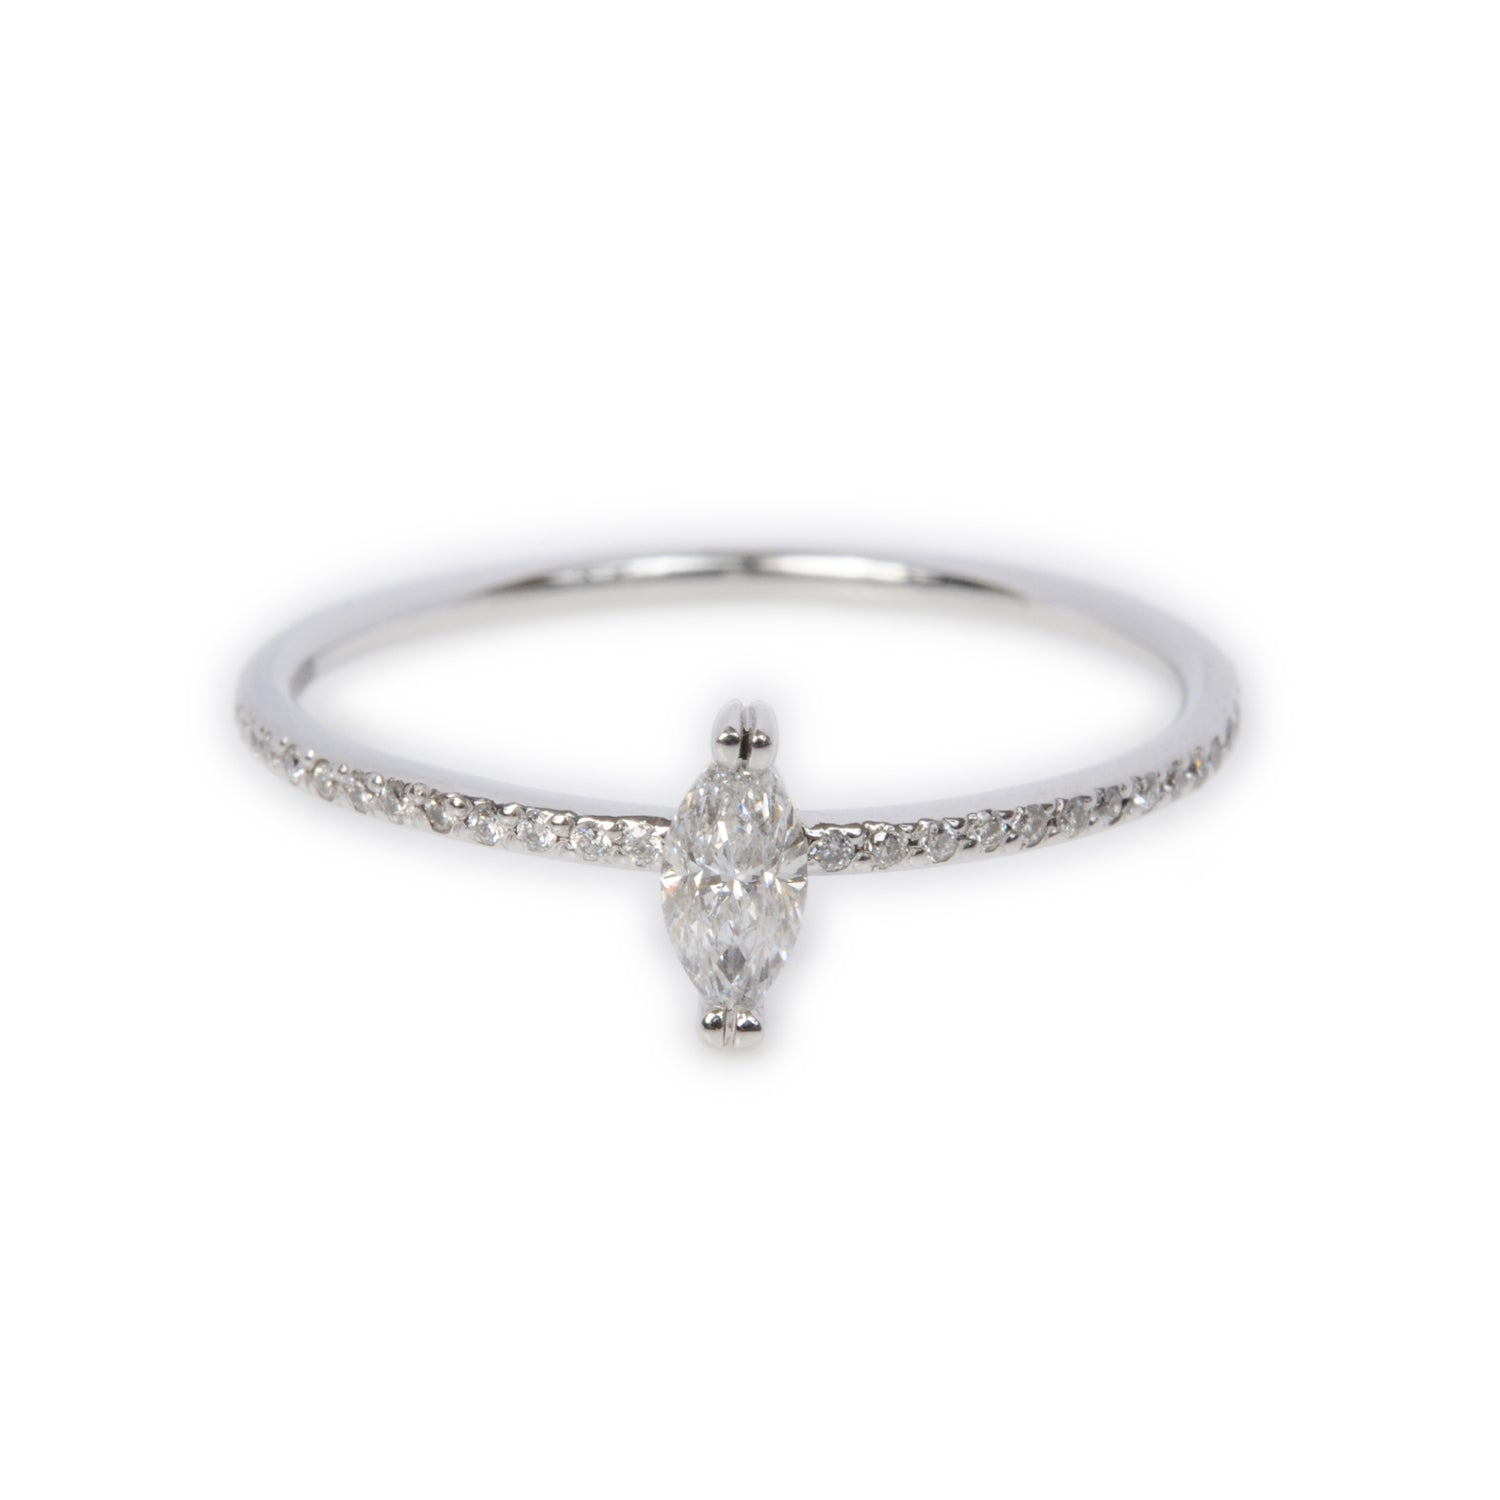 Sweet Pea 18ct white gold marquise diamond engagement ring with diamond set band.